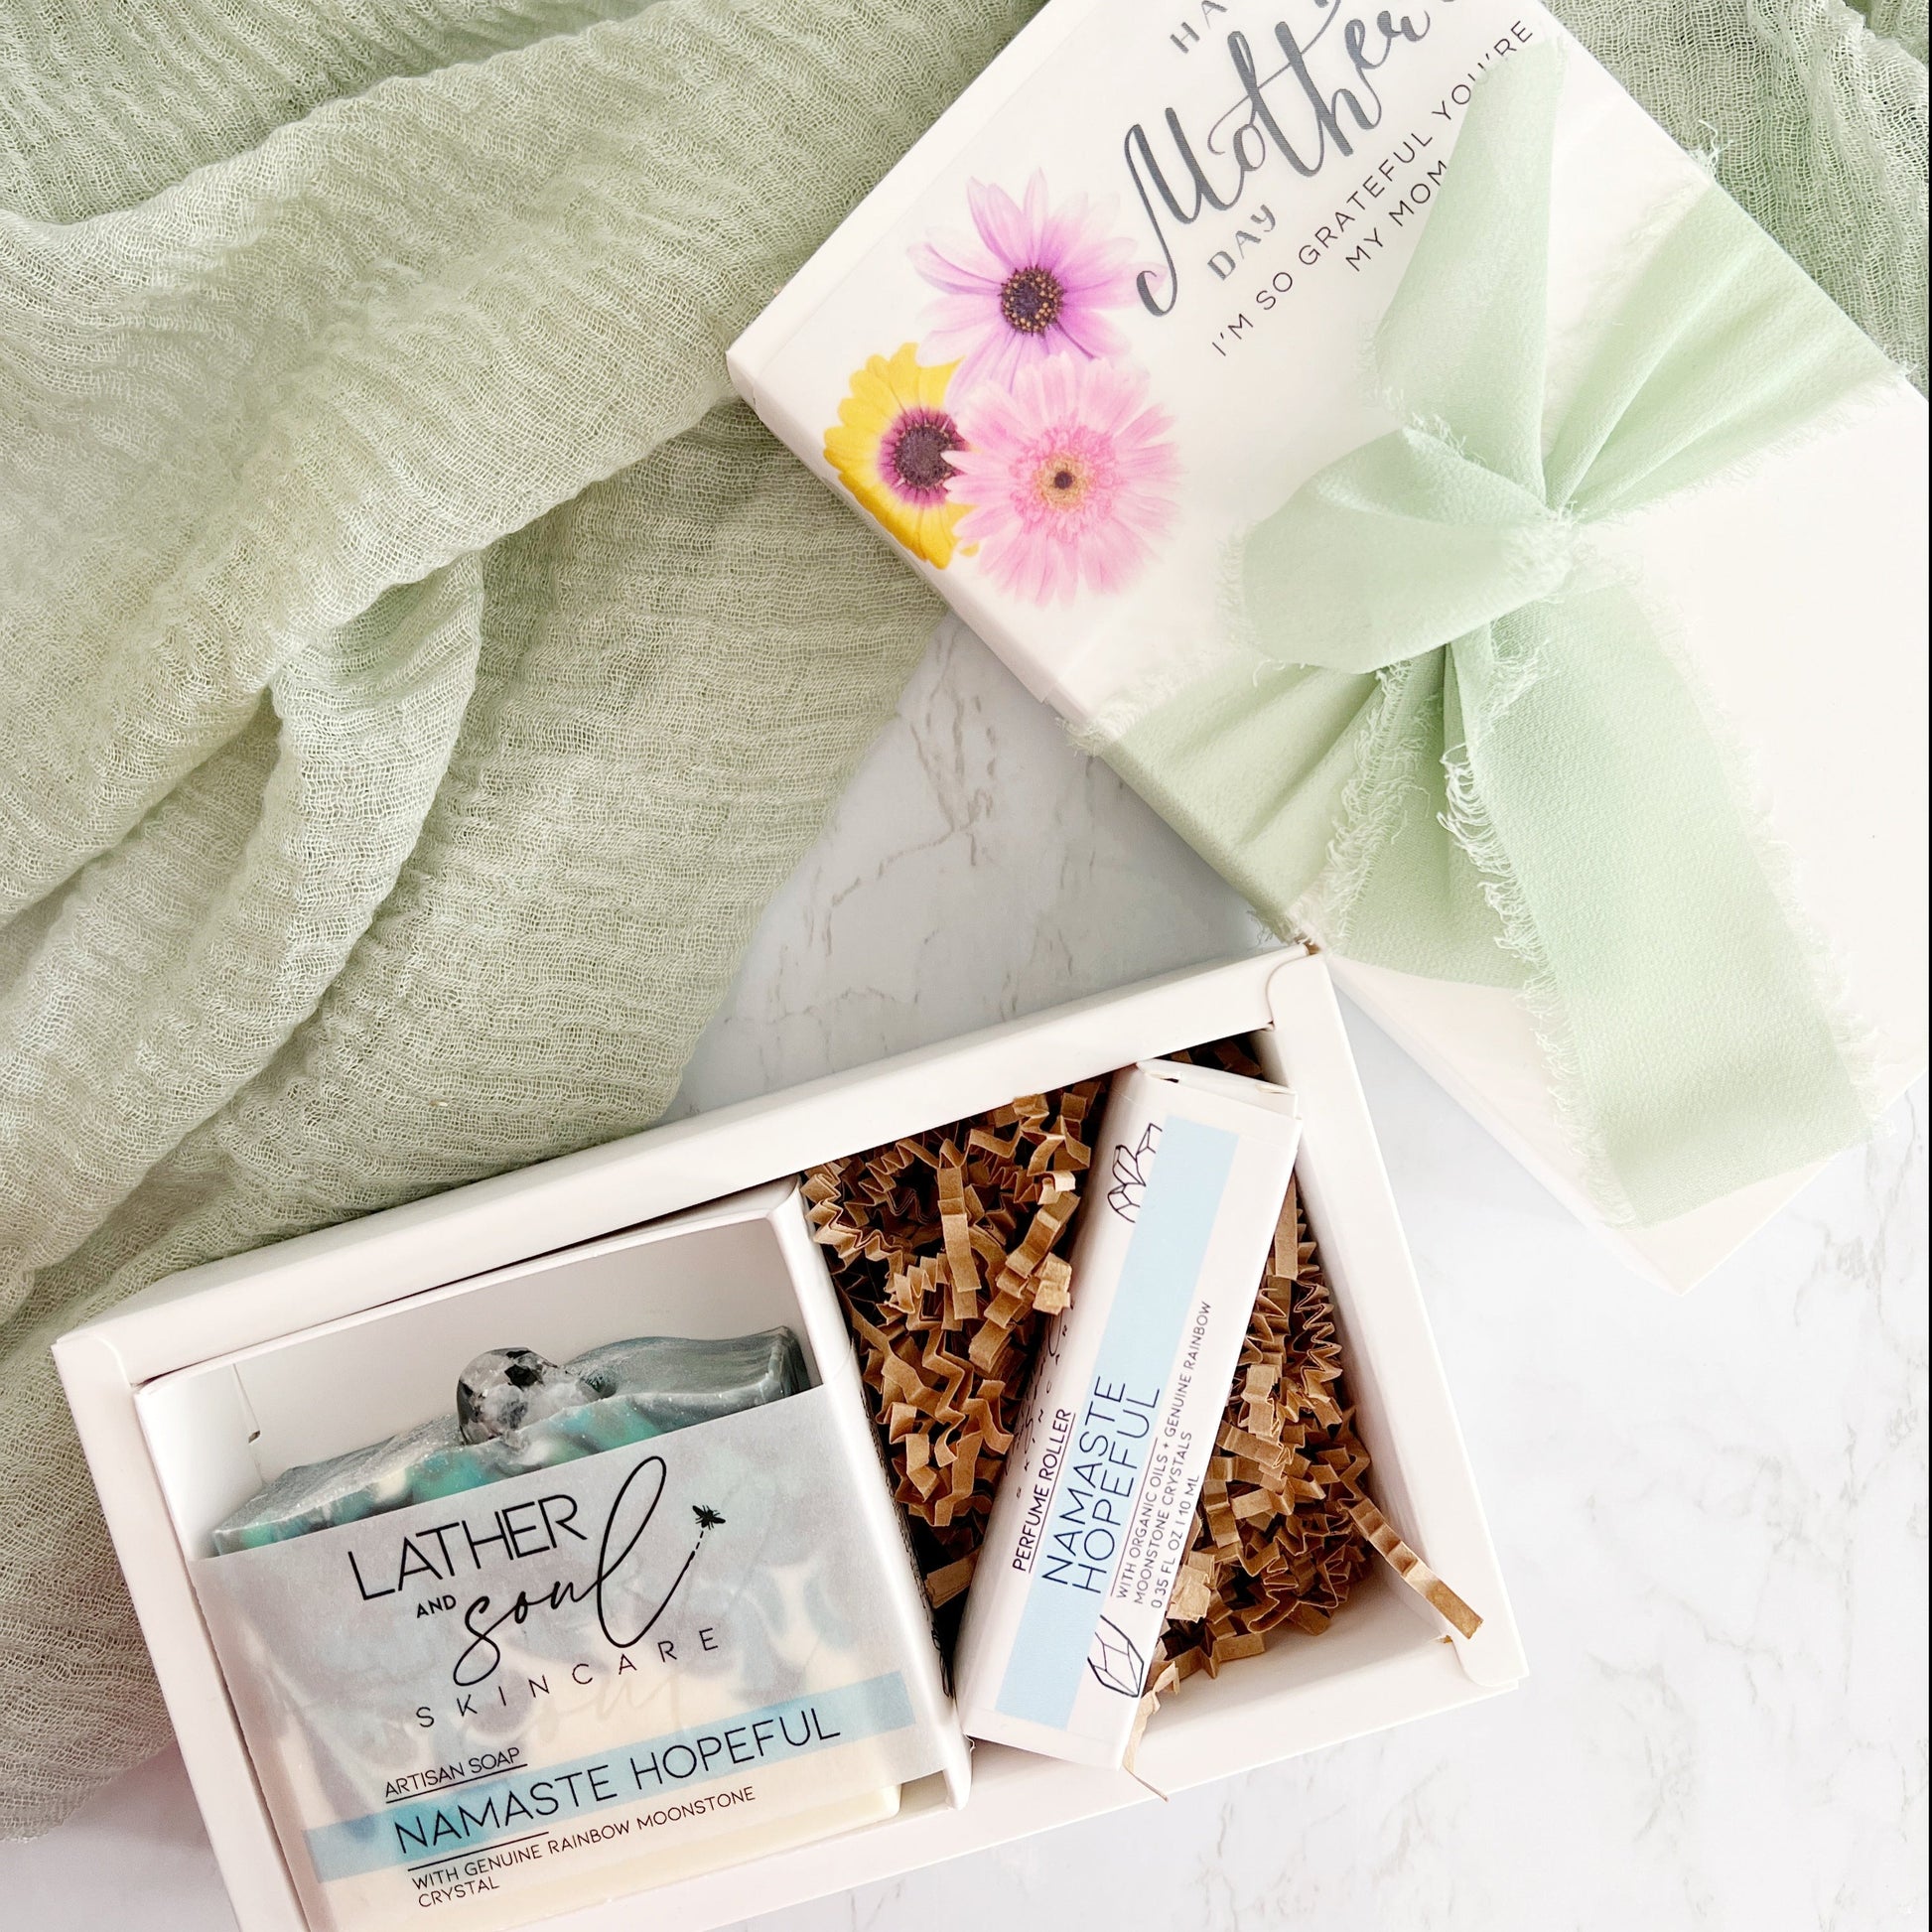 The best handmade soap with real crystals and perfume for Mother's Day